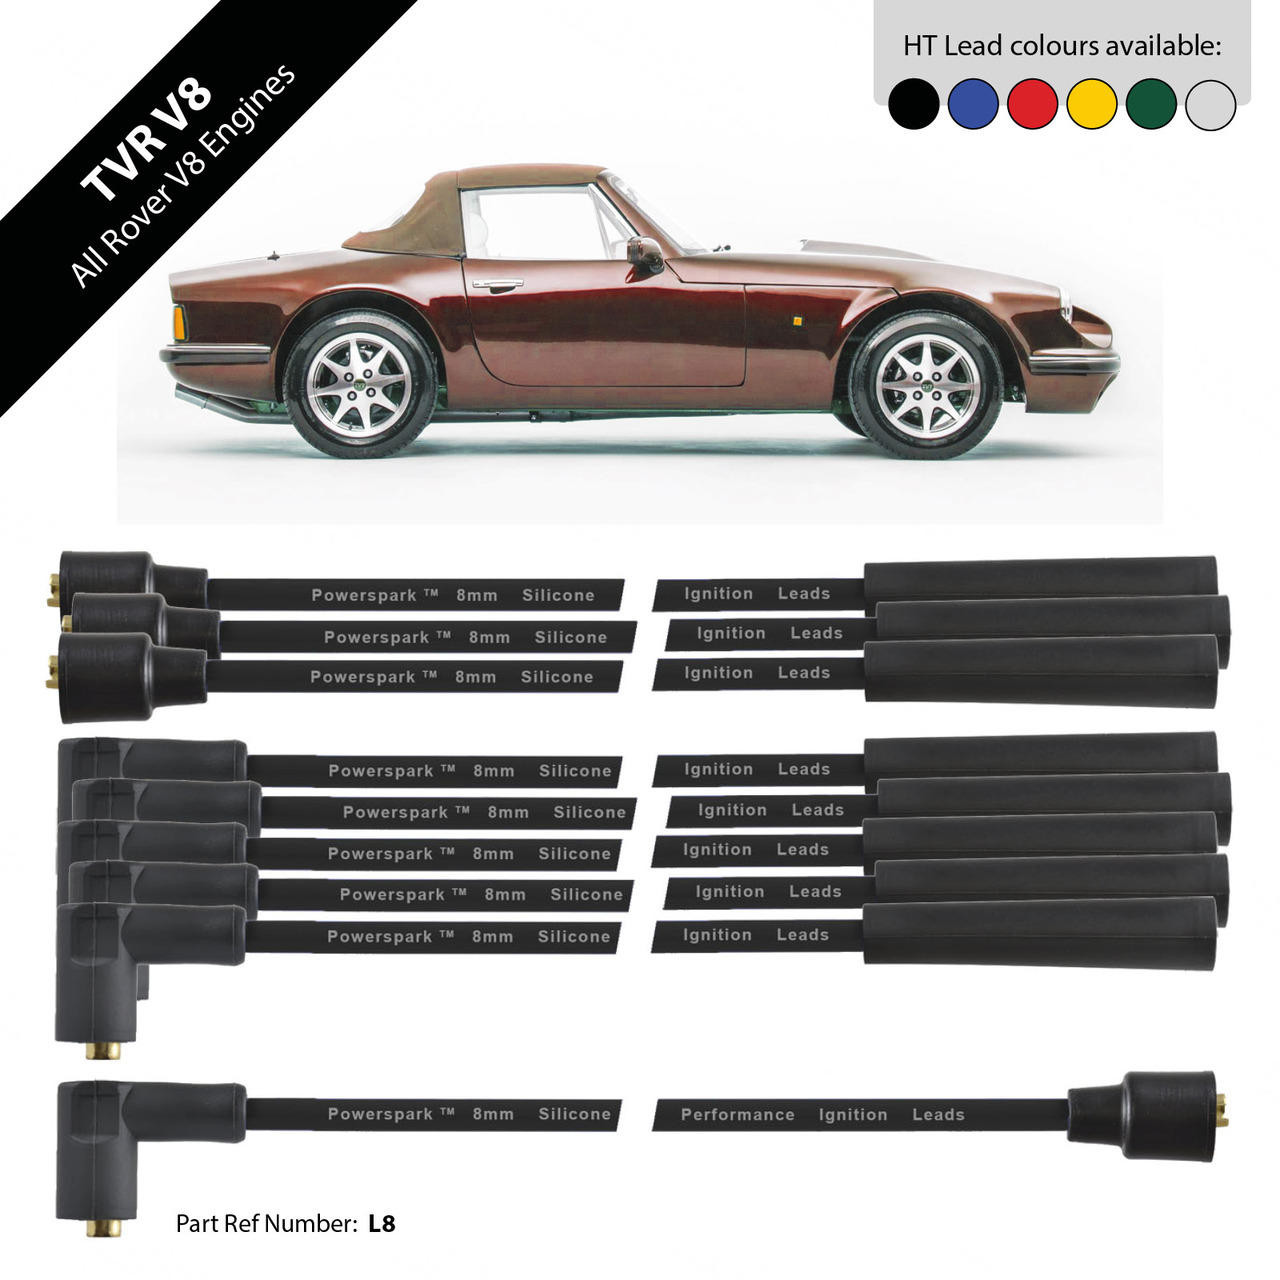 Powerspark TVR V8 HT Leads 8mm Double Silicone